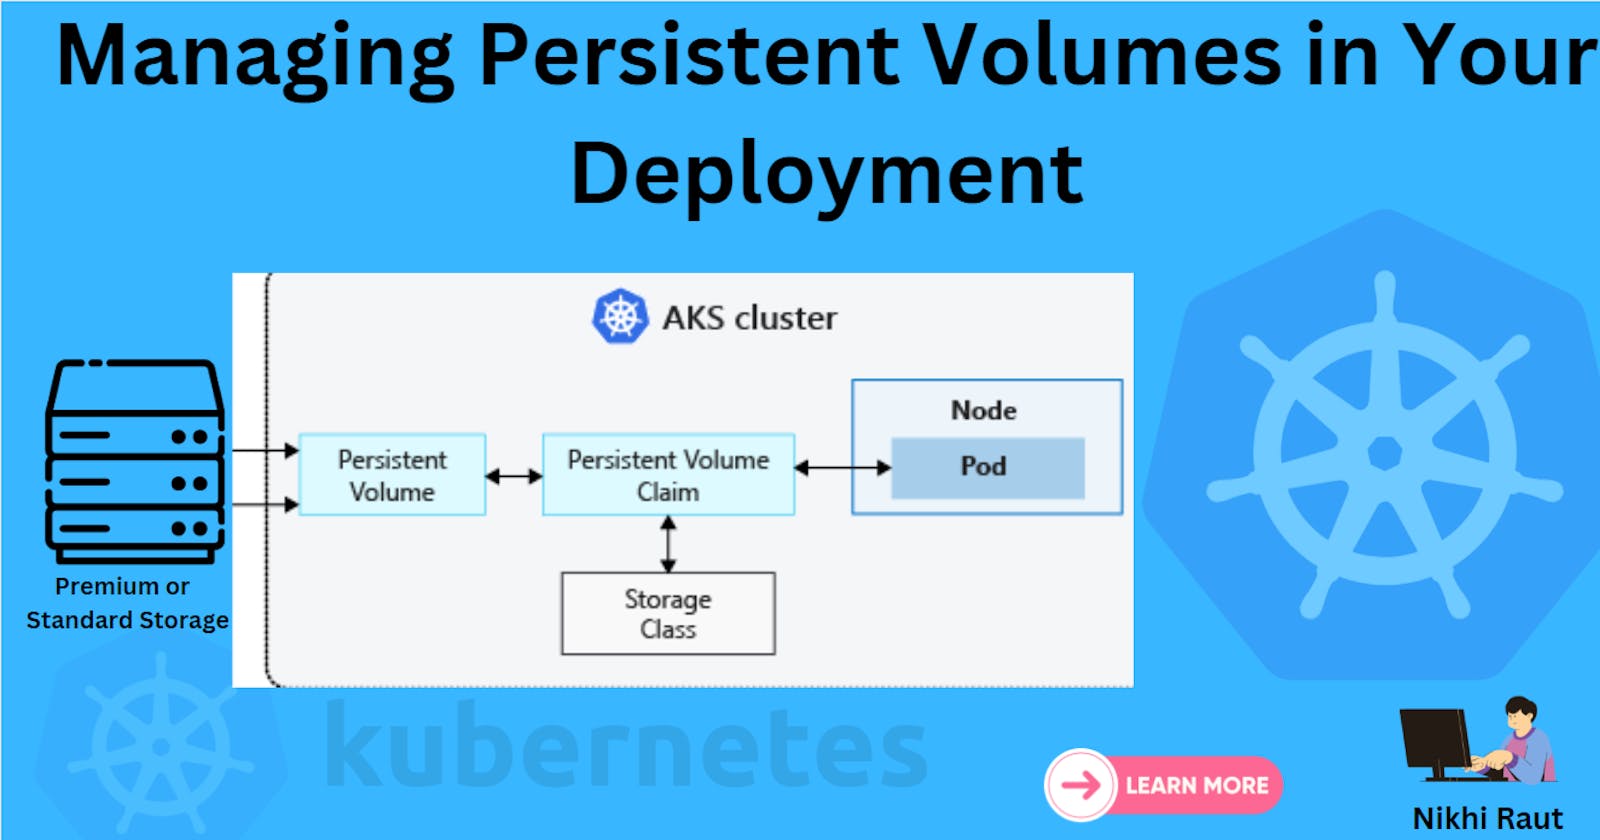 Day 36: Managing Persistent Volumes in Your Deployment